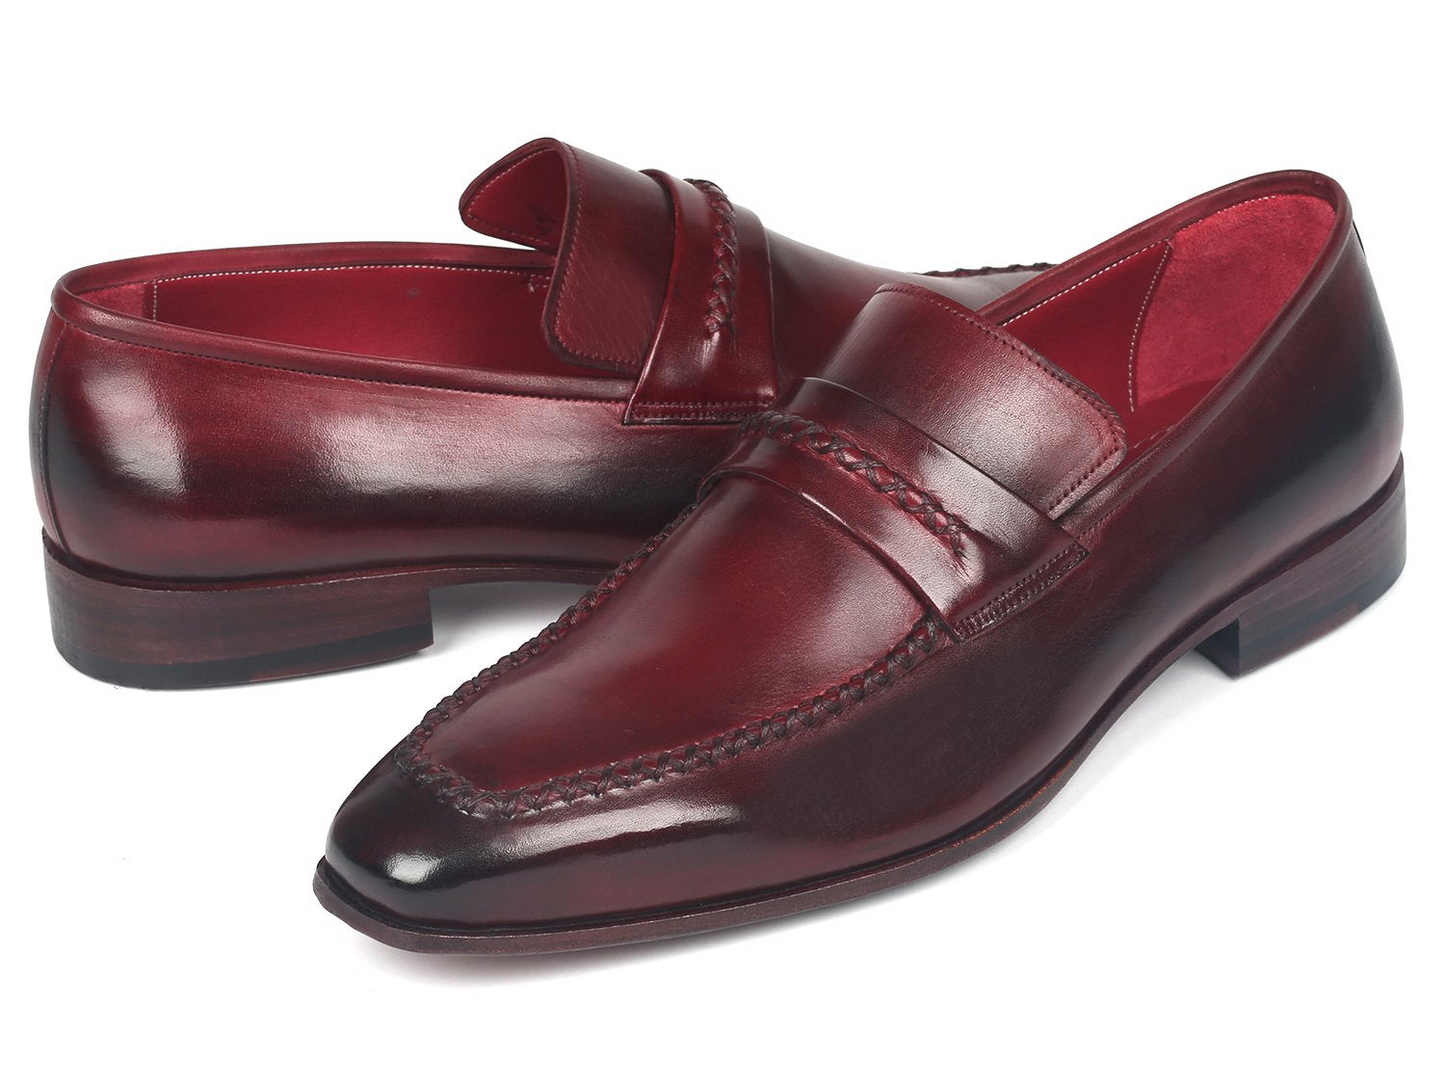 Loafers Bordeaux, Handmade to order.